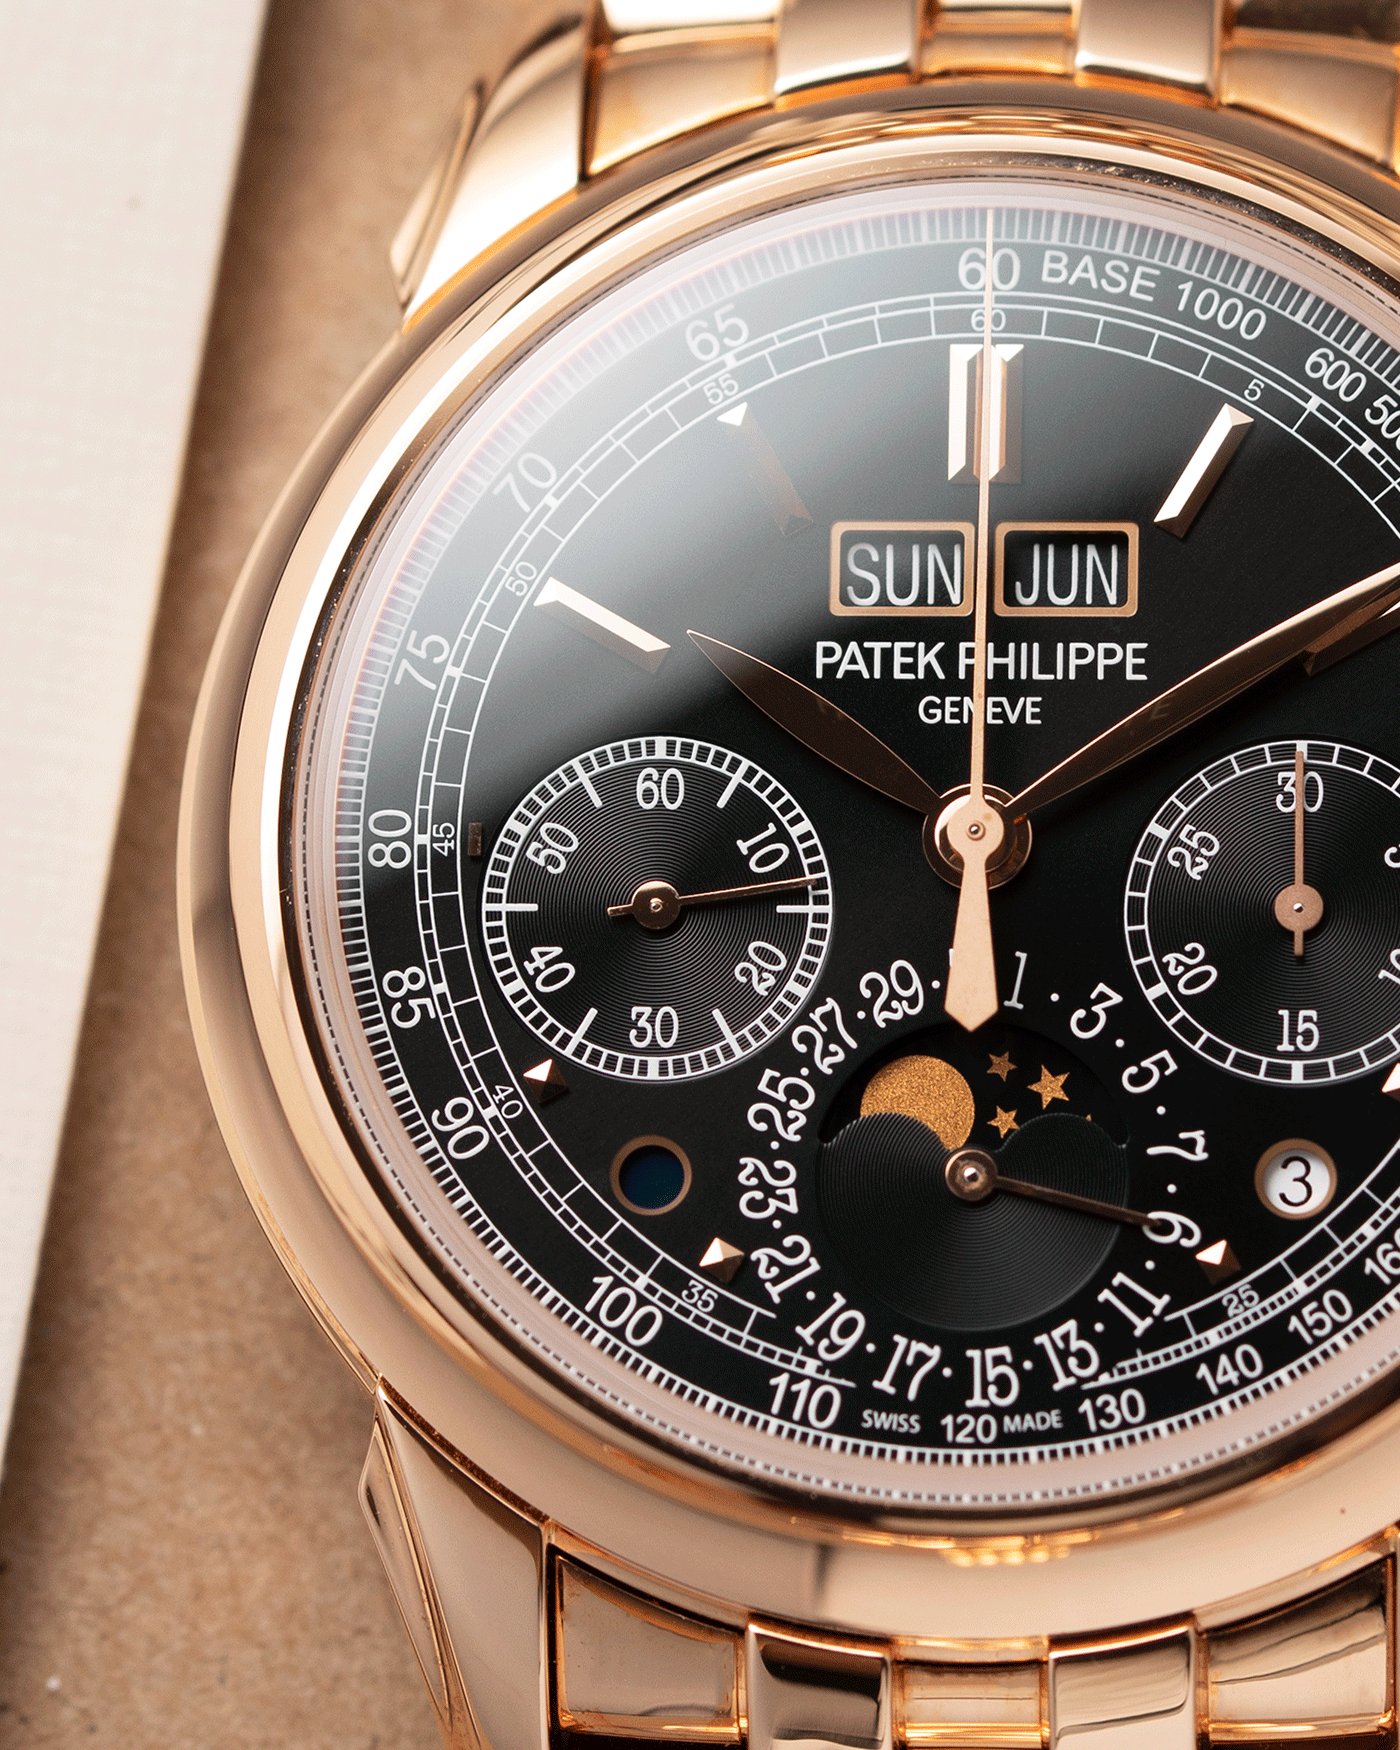 Patek Philippe 5270R Perpetual Calendar Chronograph Watch | S.Song Timepieces 